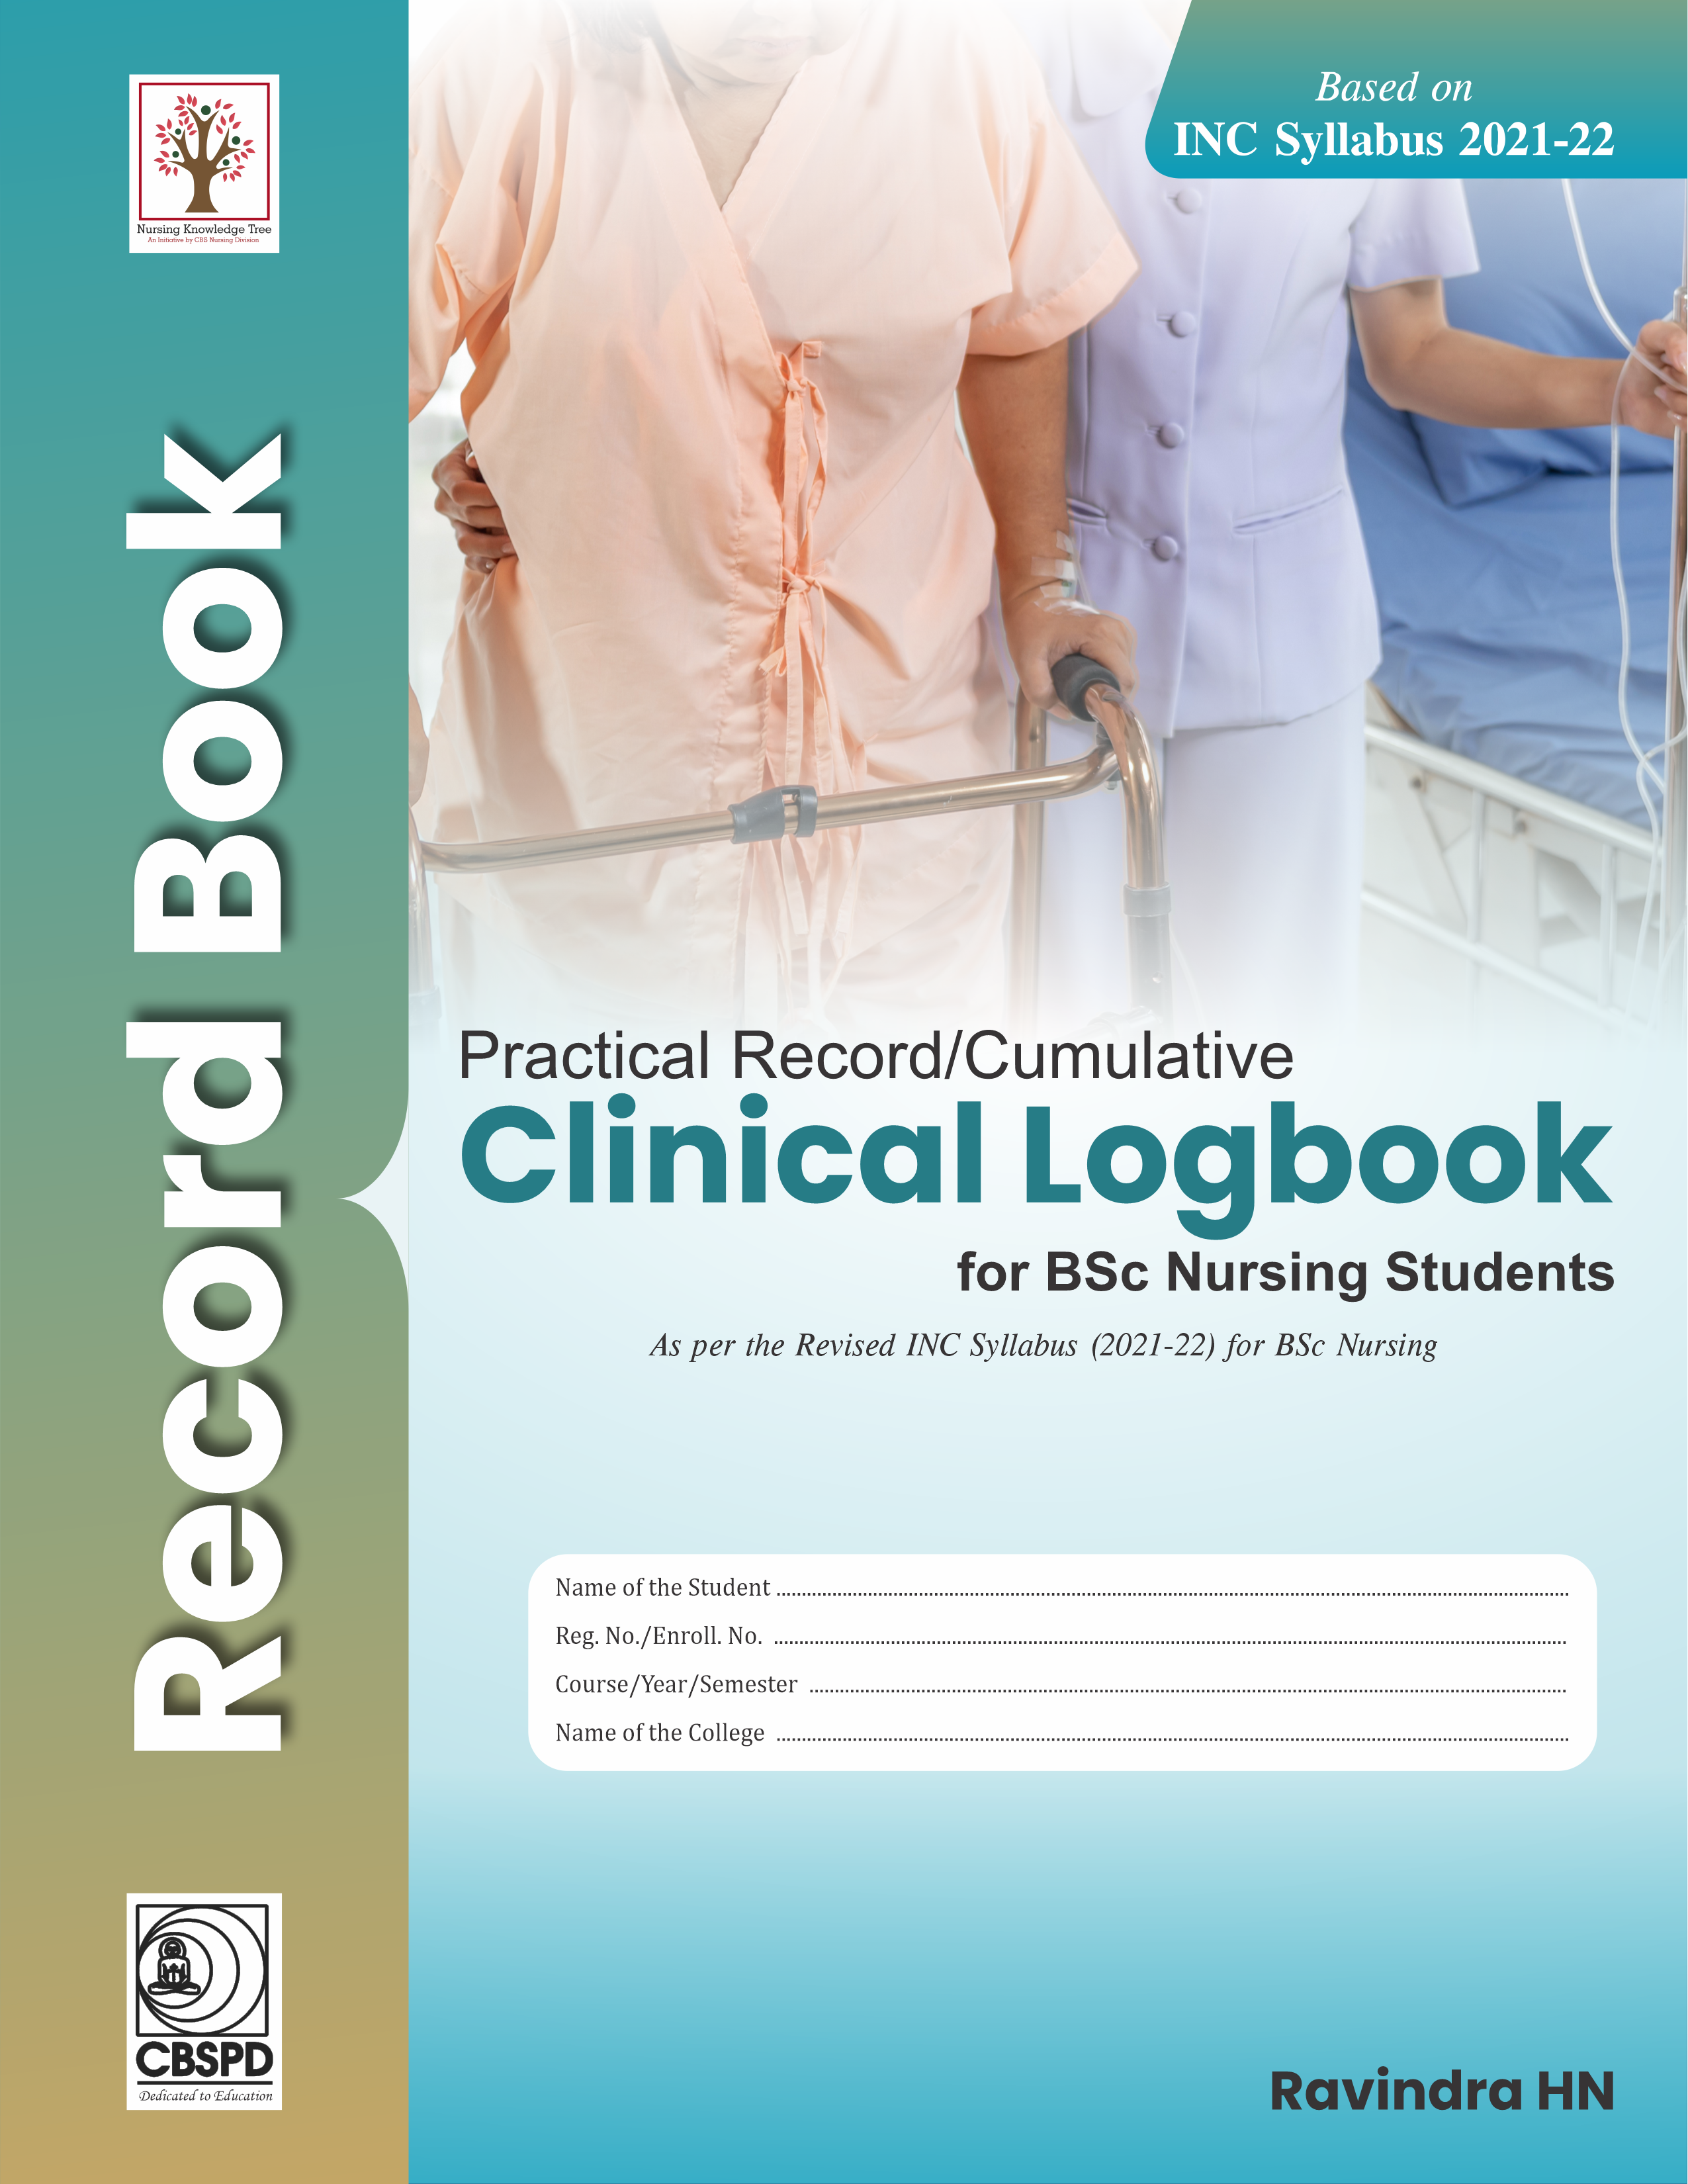 Practical Record/Cumulative Clinical Logbook for BSc Nursing Students As per the Revised INC Syllabus (2021-22) for BSc Nursing